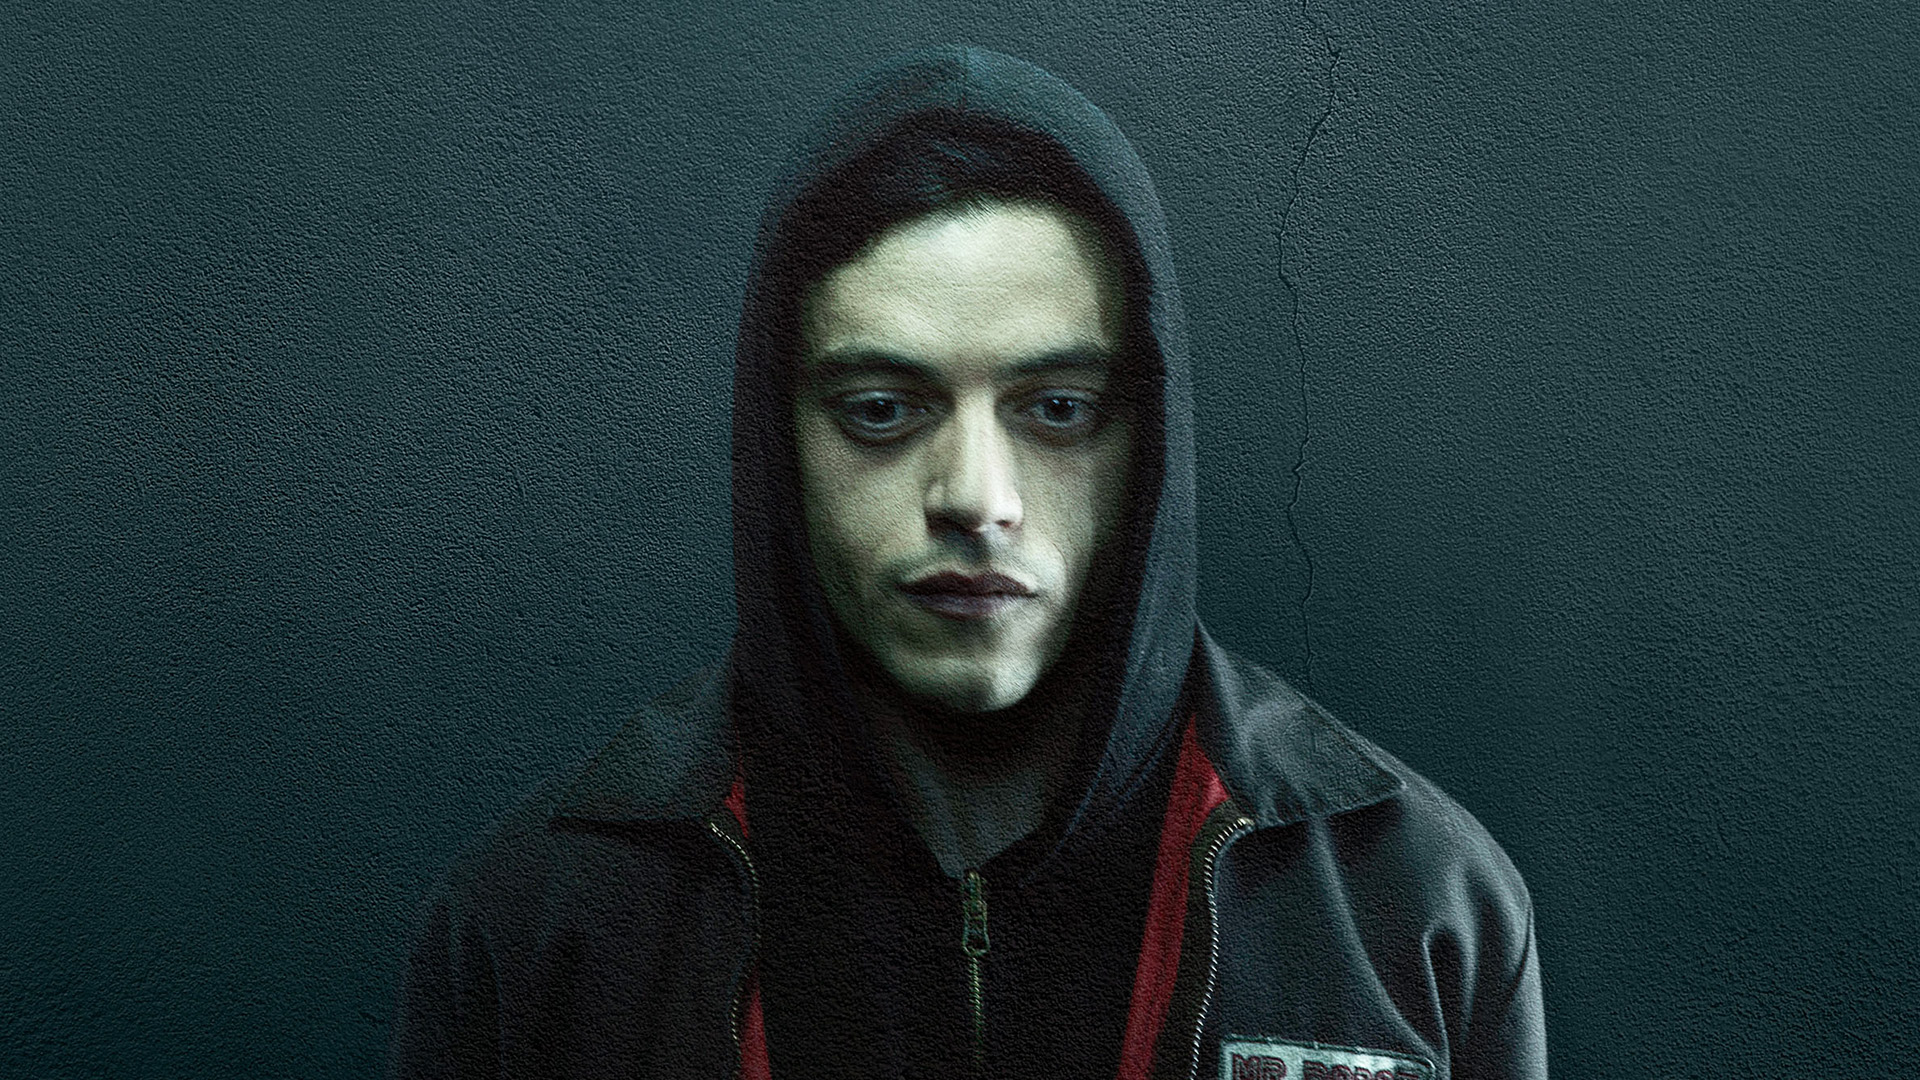 Mr Robot Season 3 Wallpaper, HD TV Series 4K Wallpapers, Images and  Background - Wallpapers Den